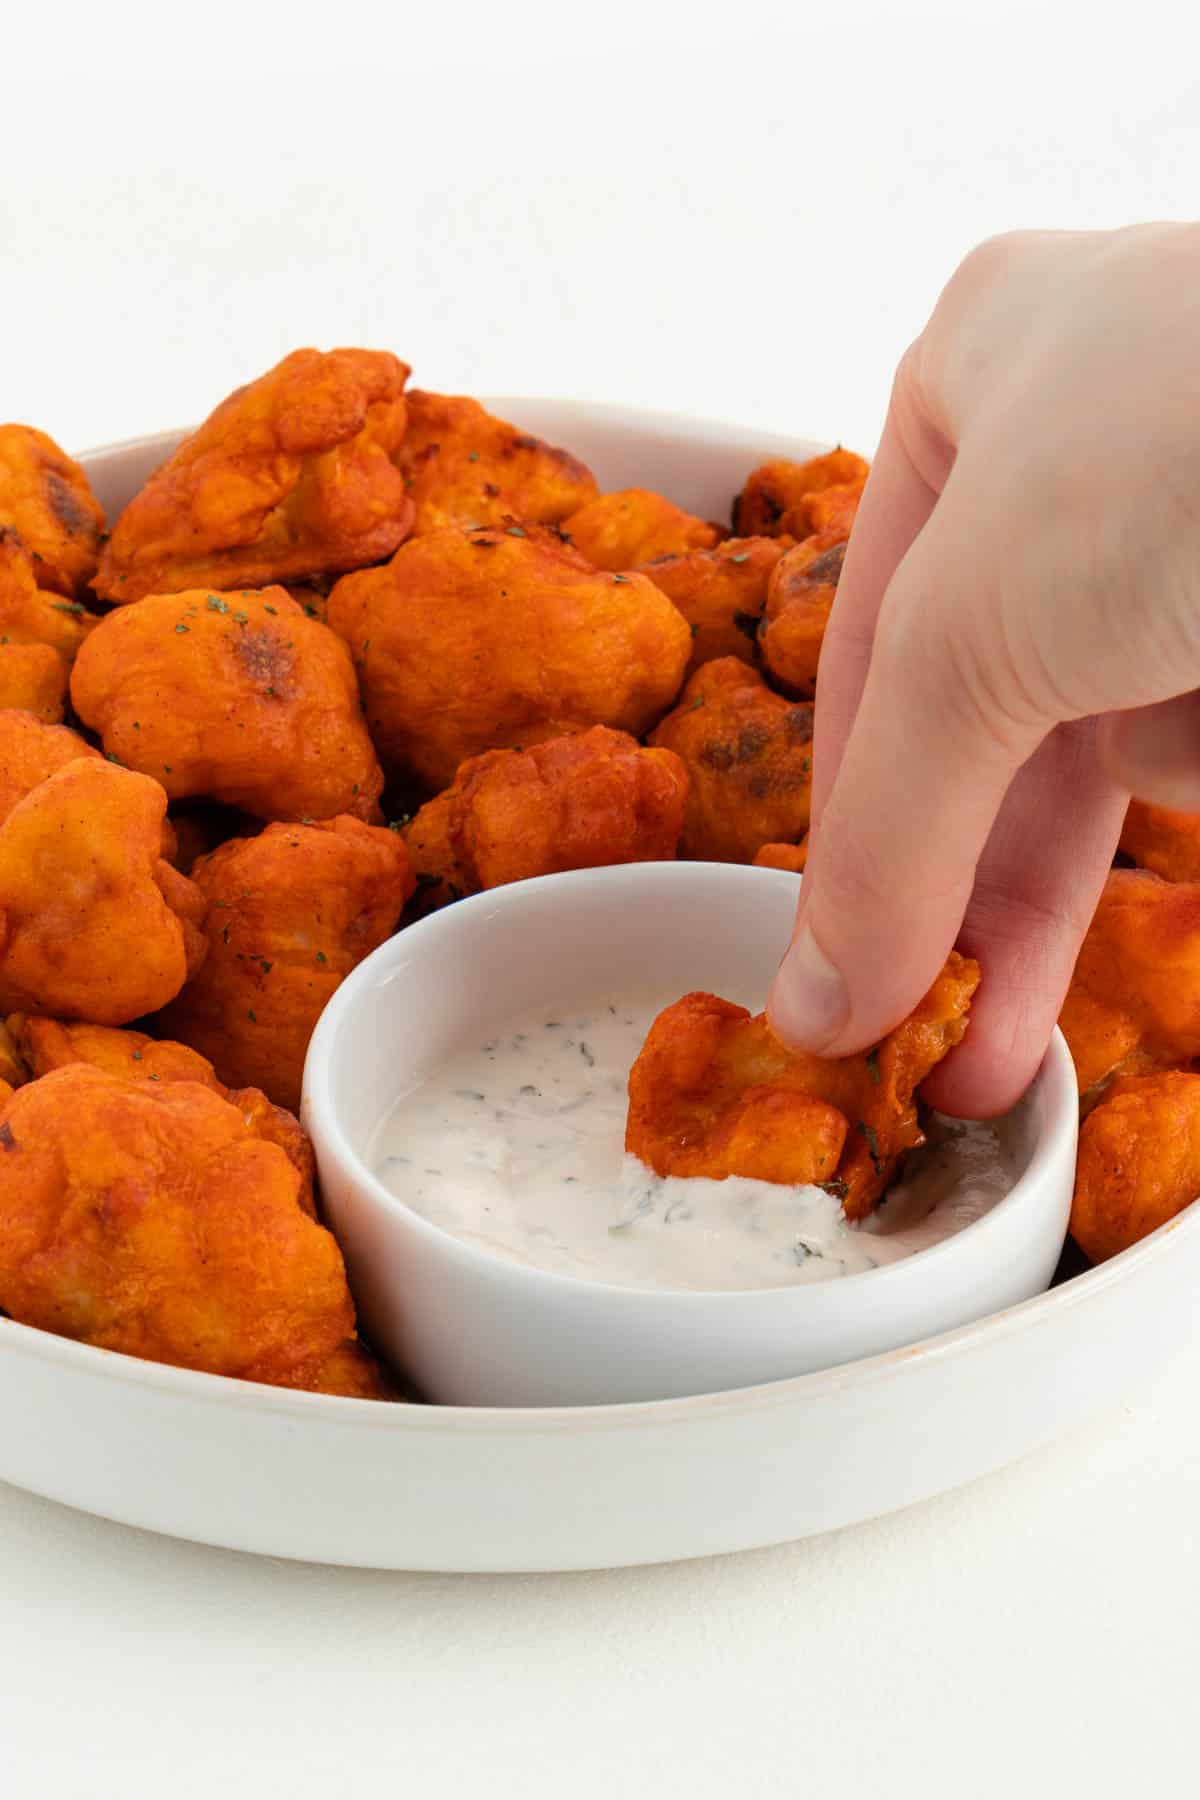 a hand dipping a vegan buffalo cauliflower wing into a bowl of ranch dressing